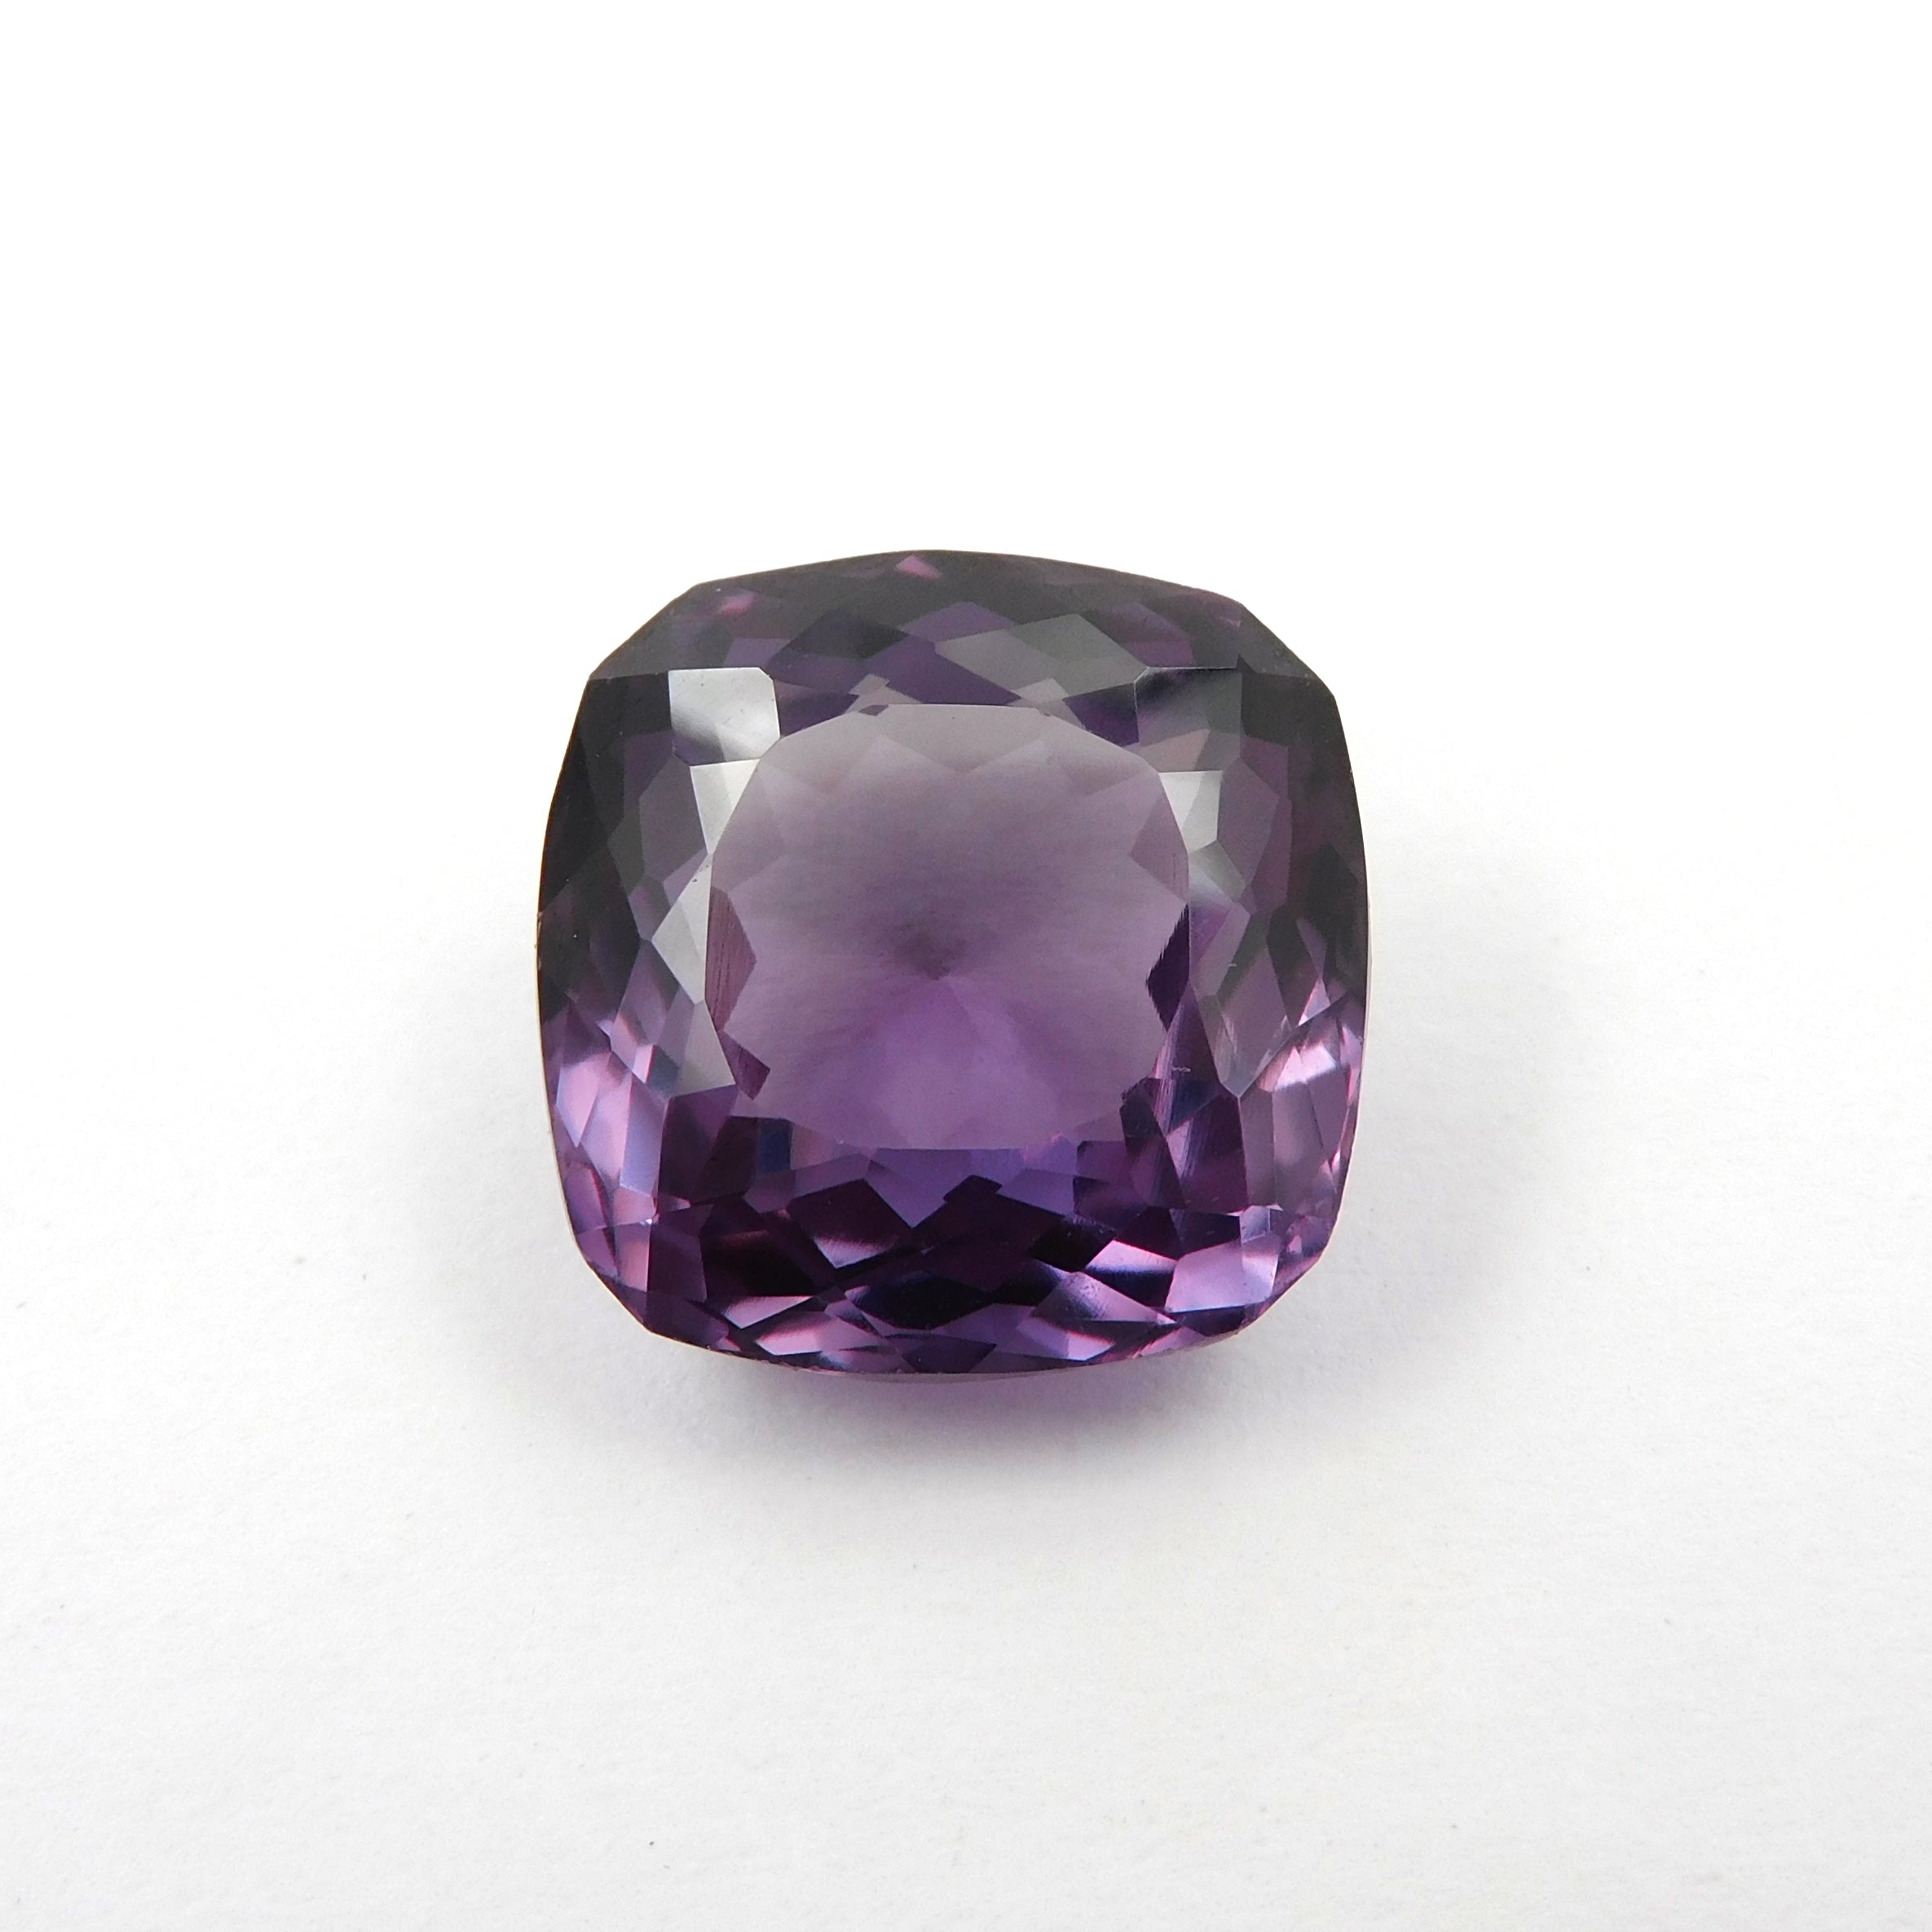 Square Cushion Cut CERTIFIED 12.62 Carat Color Change Alexandrite Natural Loose Gemstone | Free Delivery Free Gift | Gift For Her